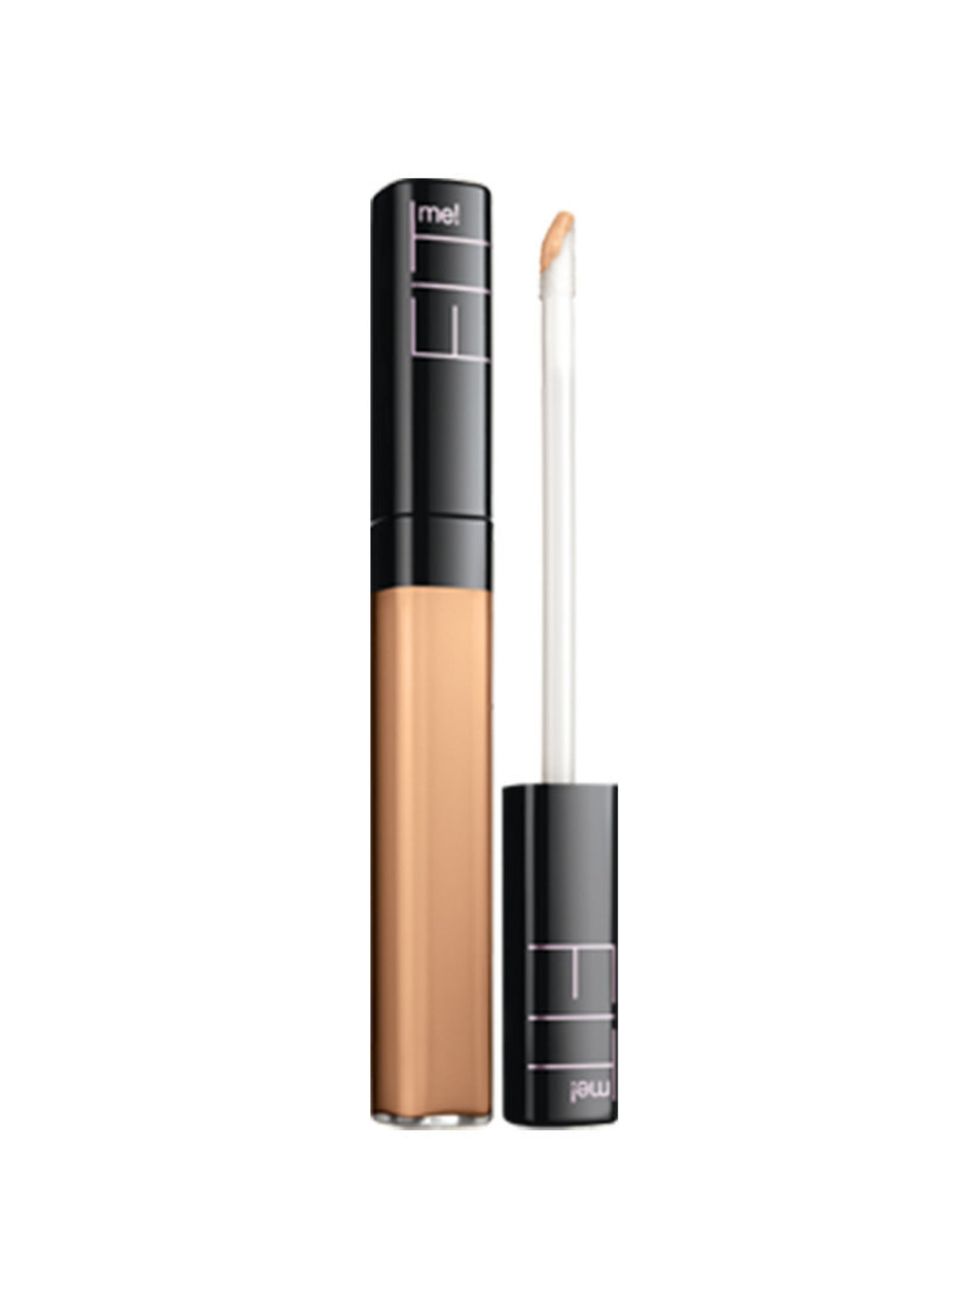 <p><a href="http://www.boots.com/en/Maybelline-Fit-Me-Concealer_1279343/">Maybelline Fit Me Concealer, £5.99.</a></p><p>Touch up any wayward blemishes with this lightweight concealer. Apply with the sponge applicator and buff in with a blending brush for 